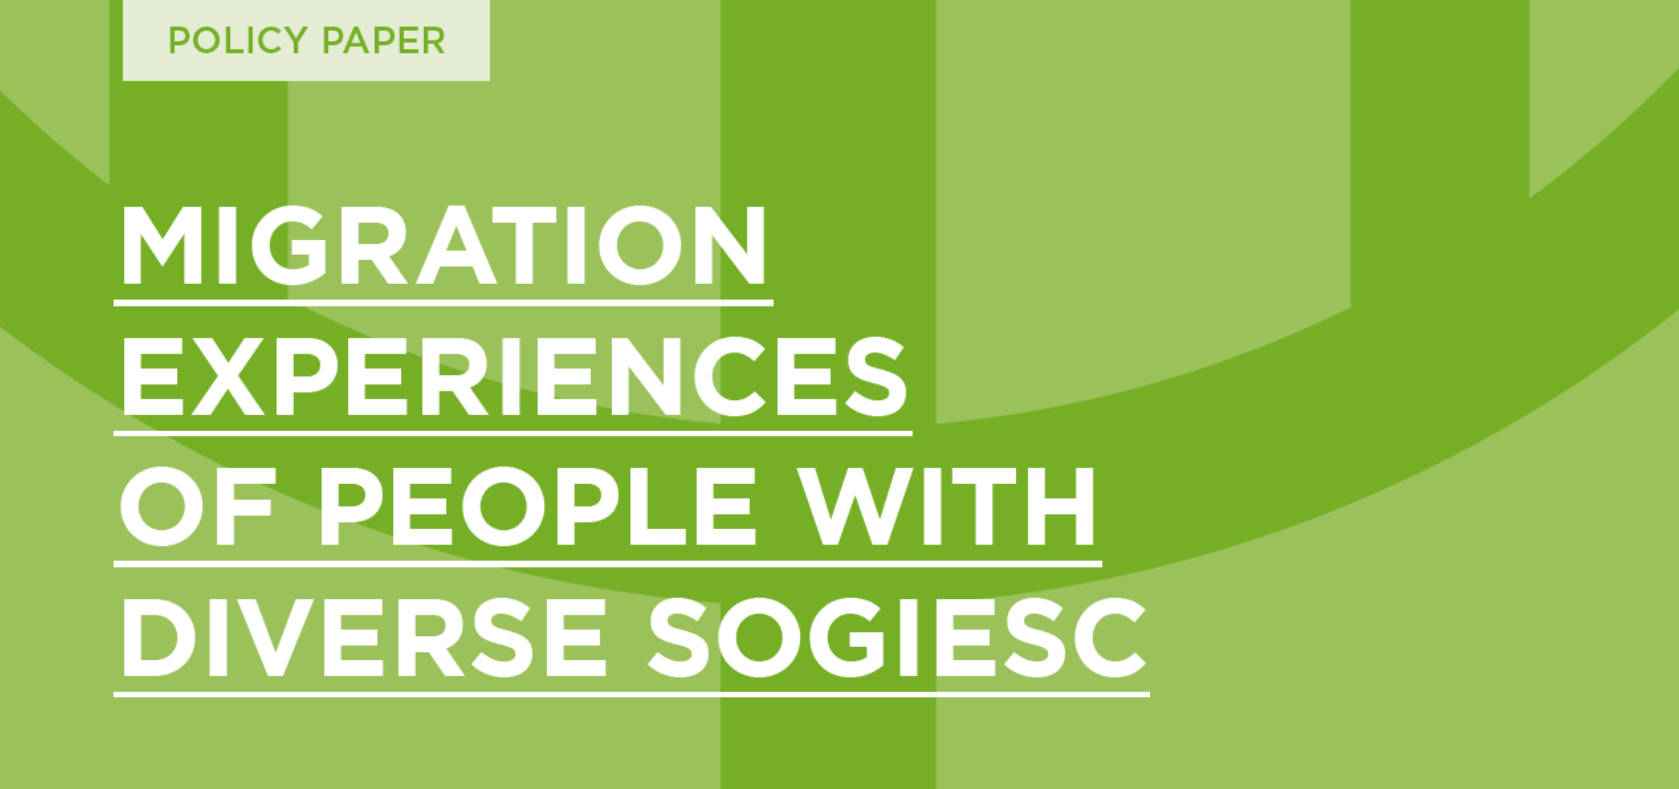 Migration experiences of people with diverse SOGIESC